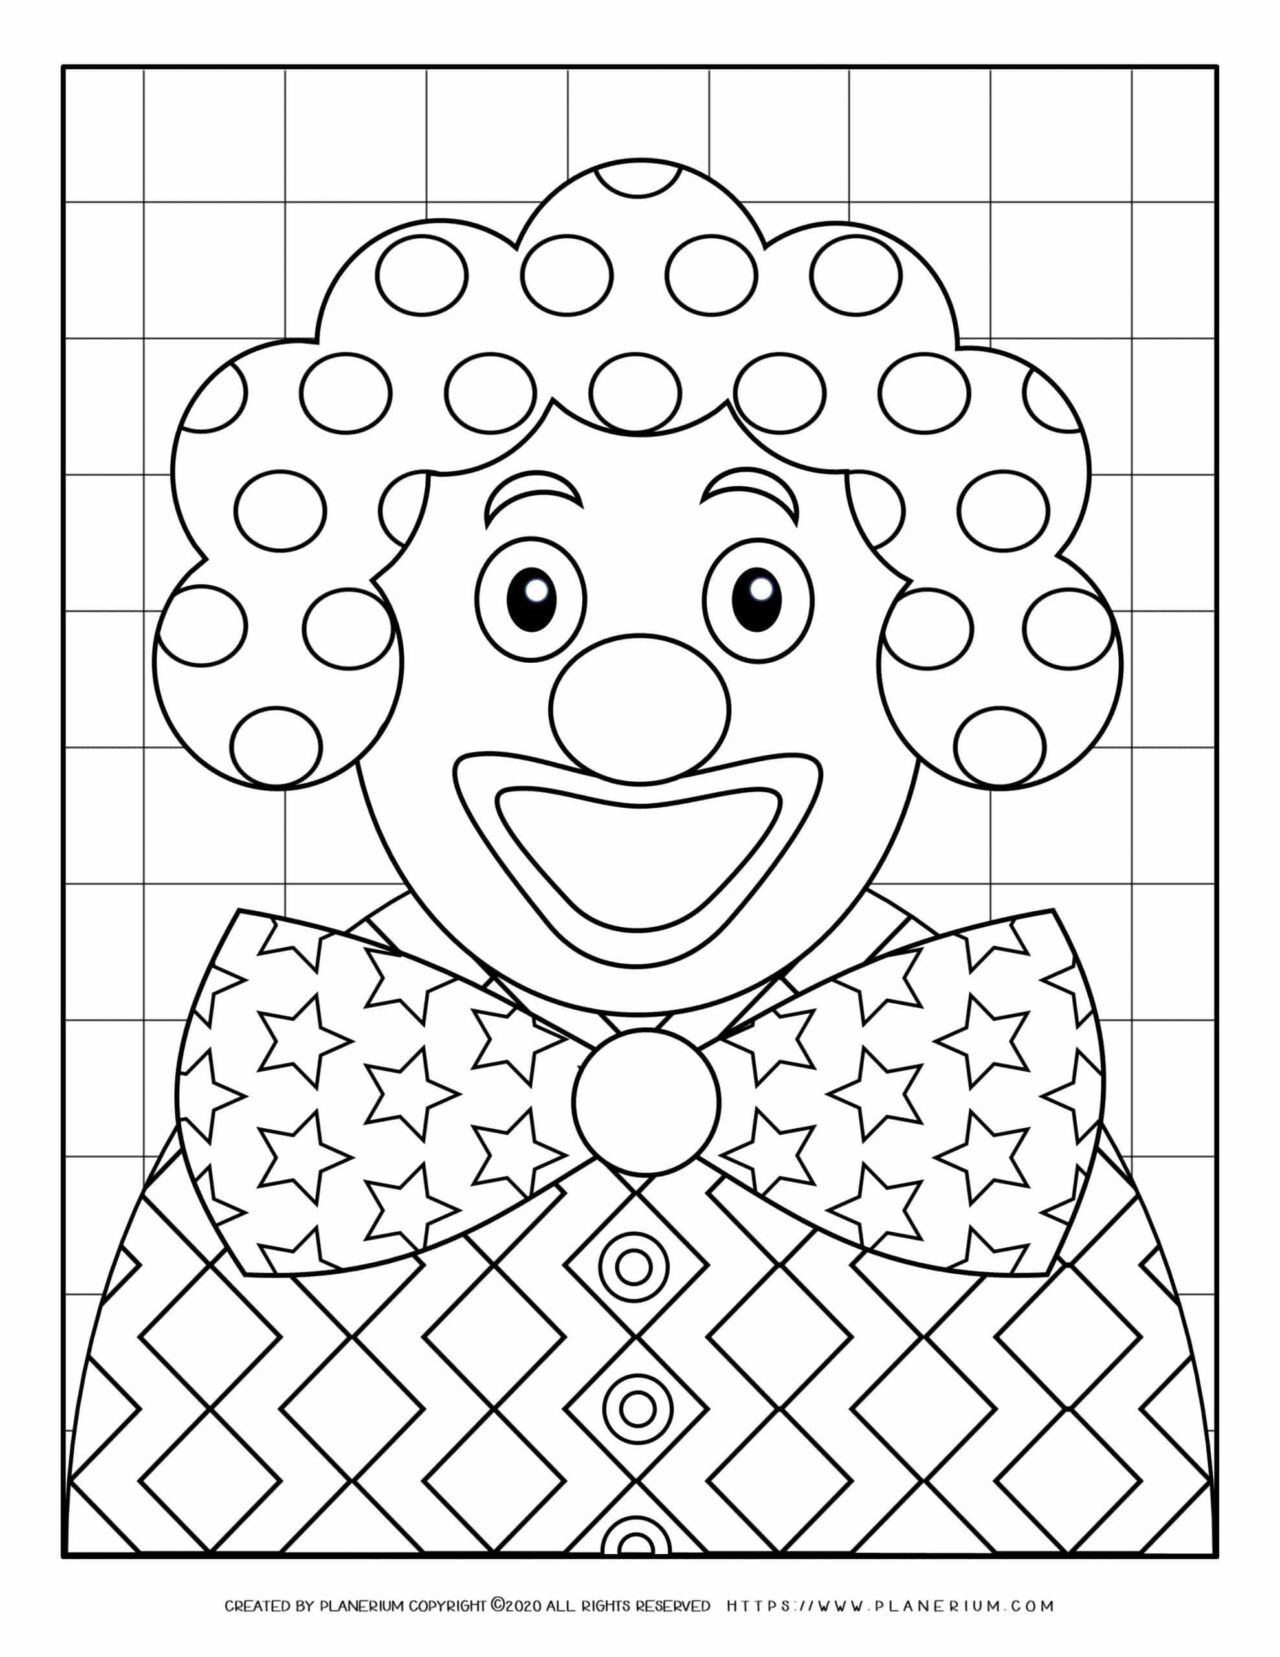 Carnival - Coloring Page Worksheet - Smiley Clown Patterns | Planerium